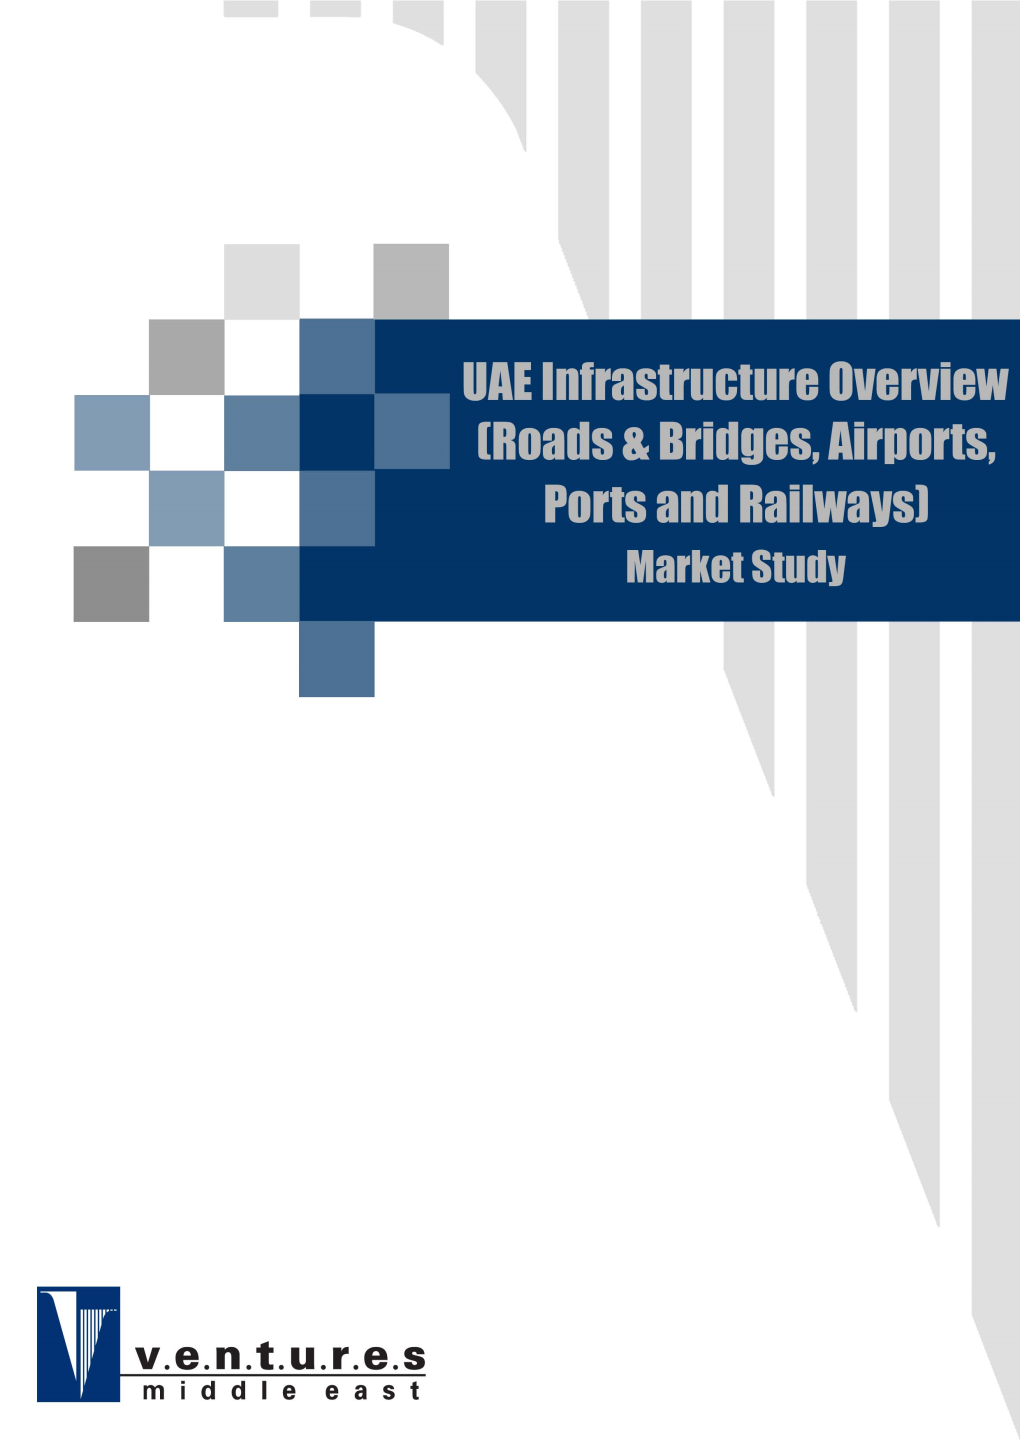 UAE Infrastructure Overview Market Study Final Version March 2006